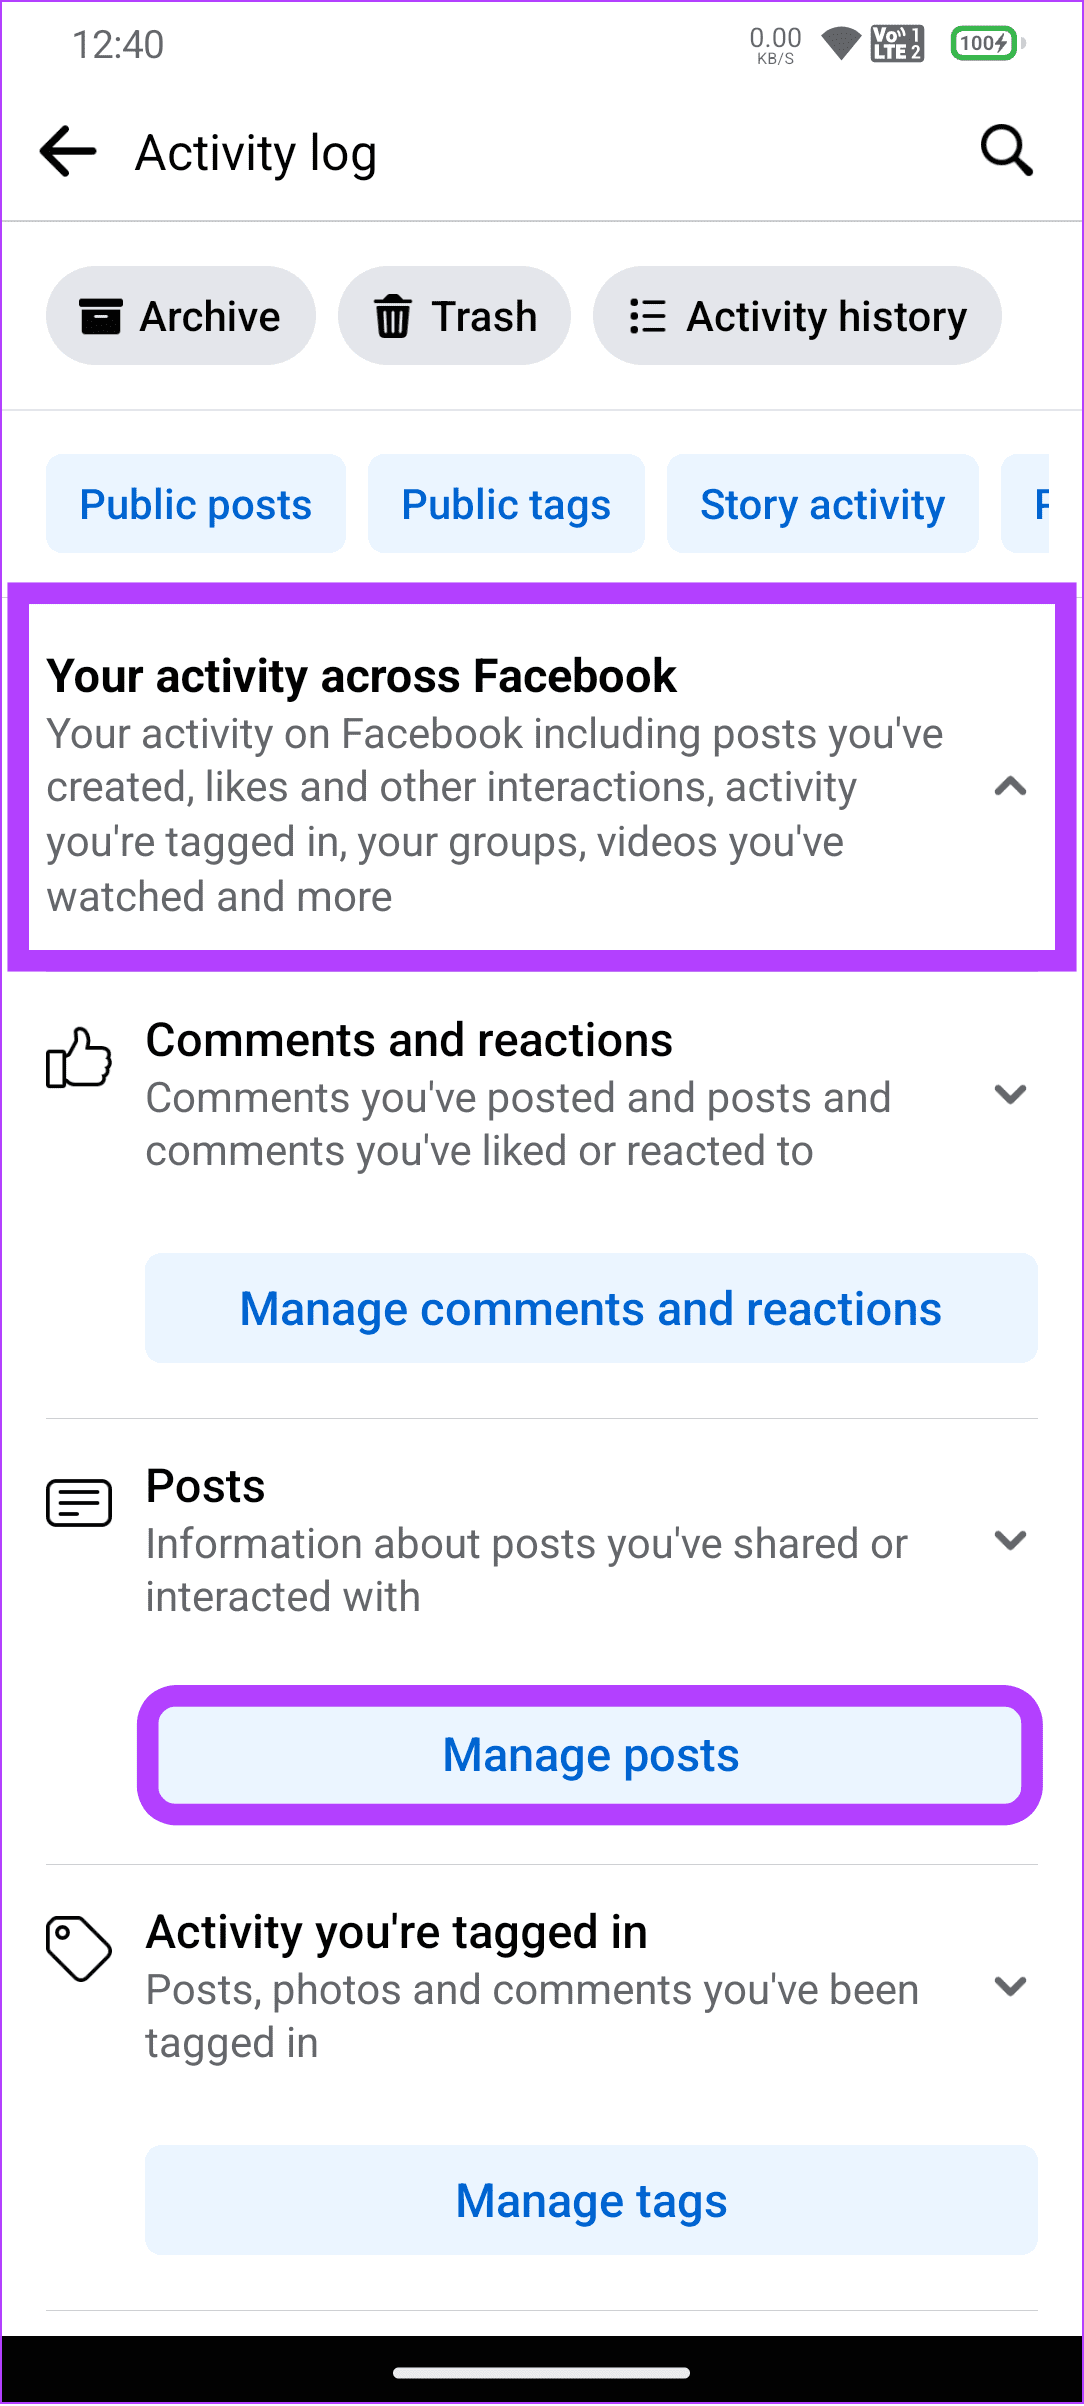 Choose activity and select posts